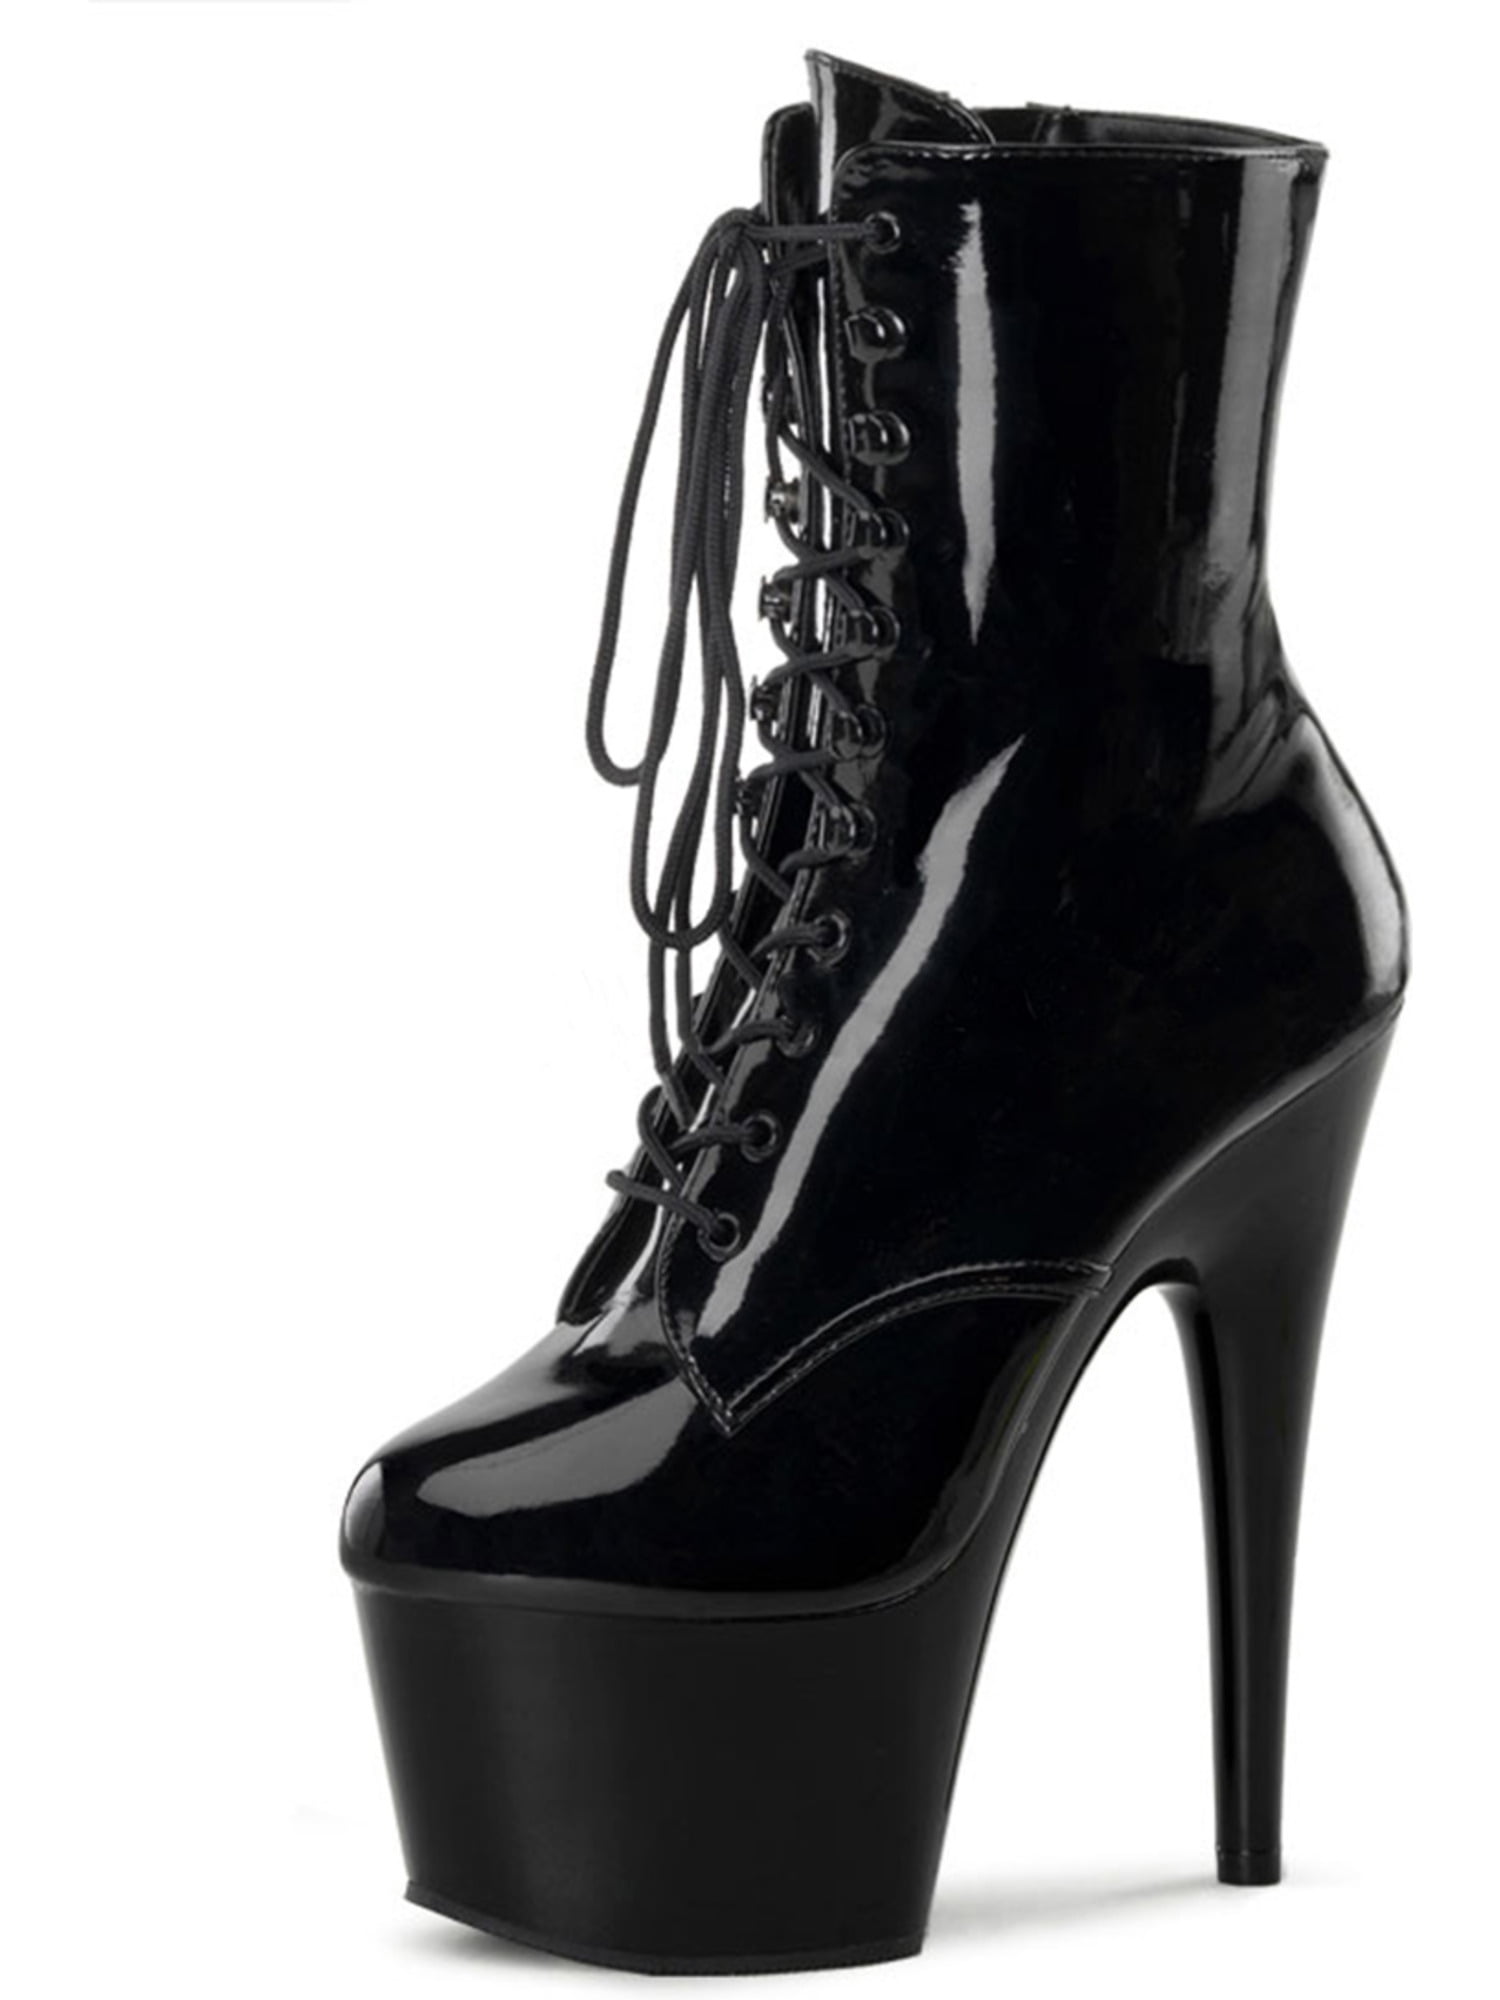 Lace Up Shiny Black Ankle Boots 